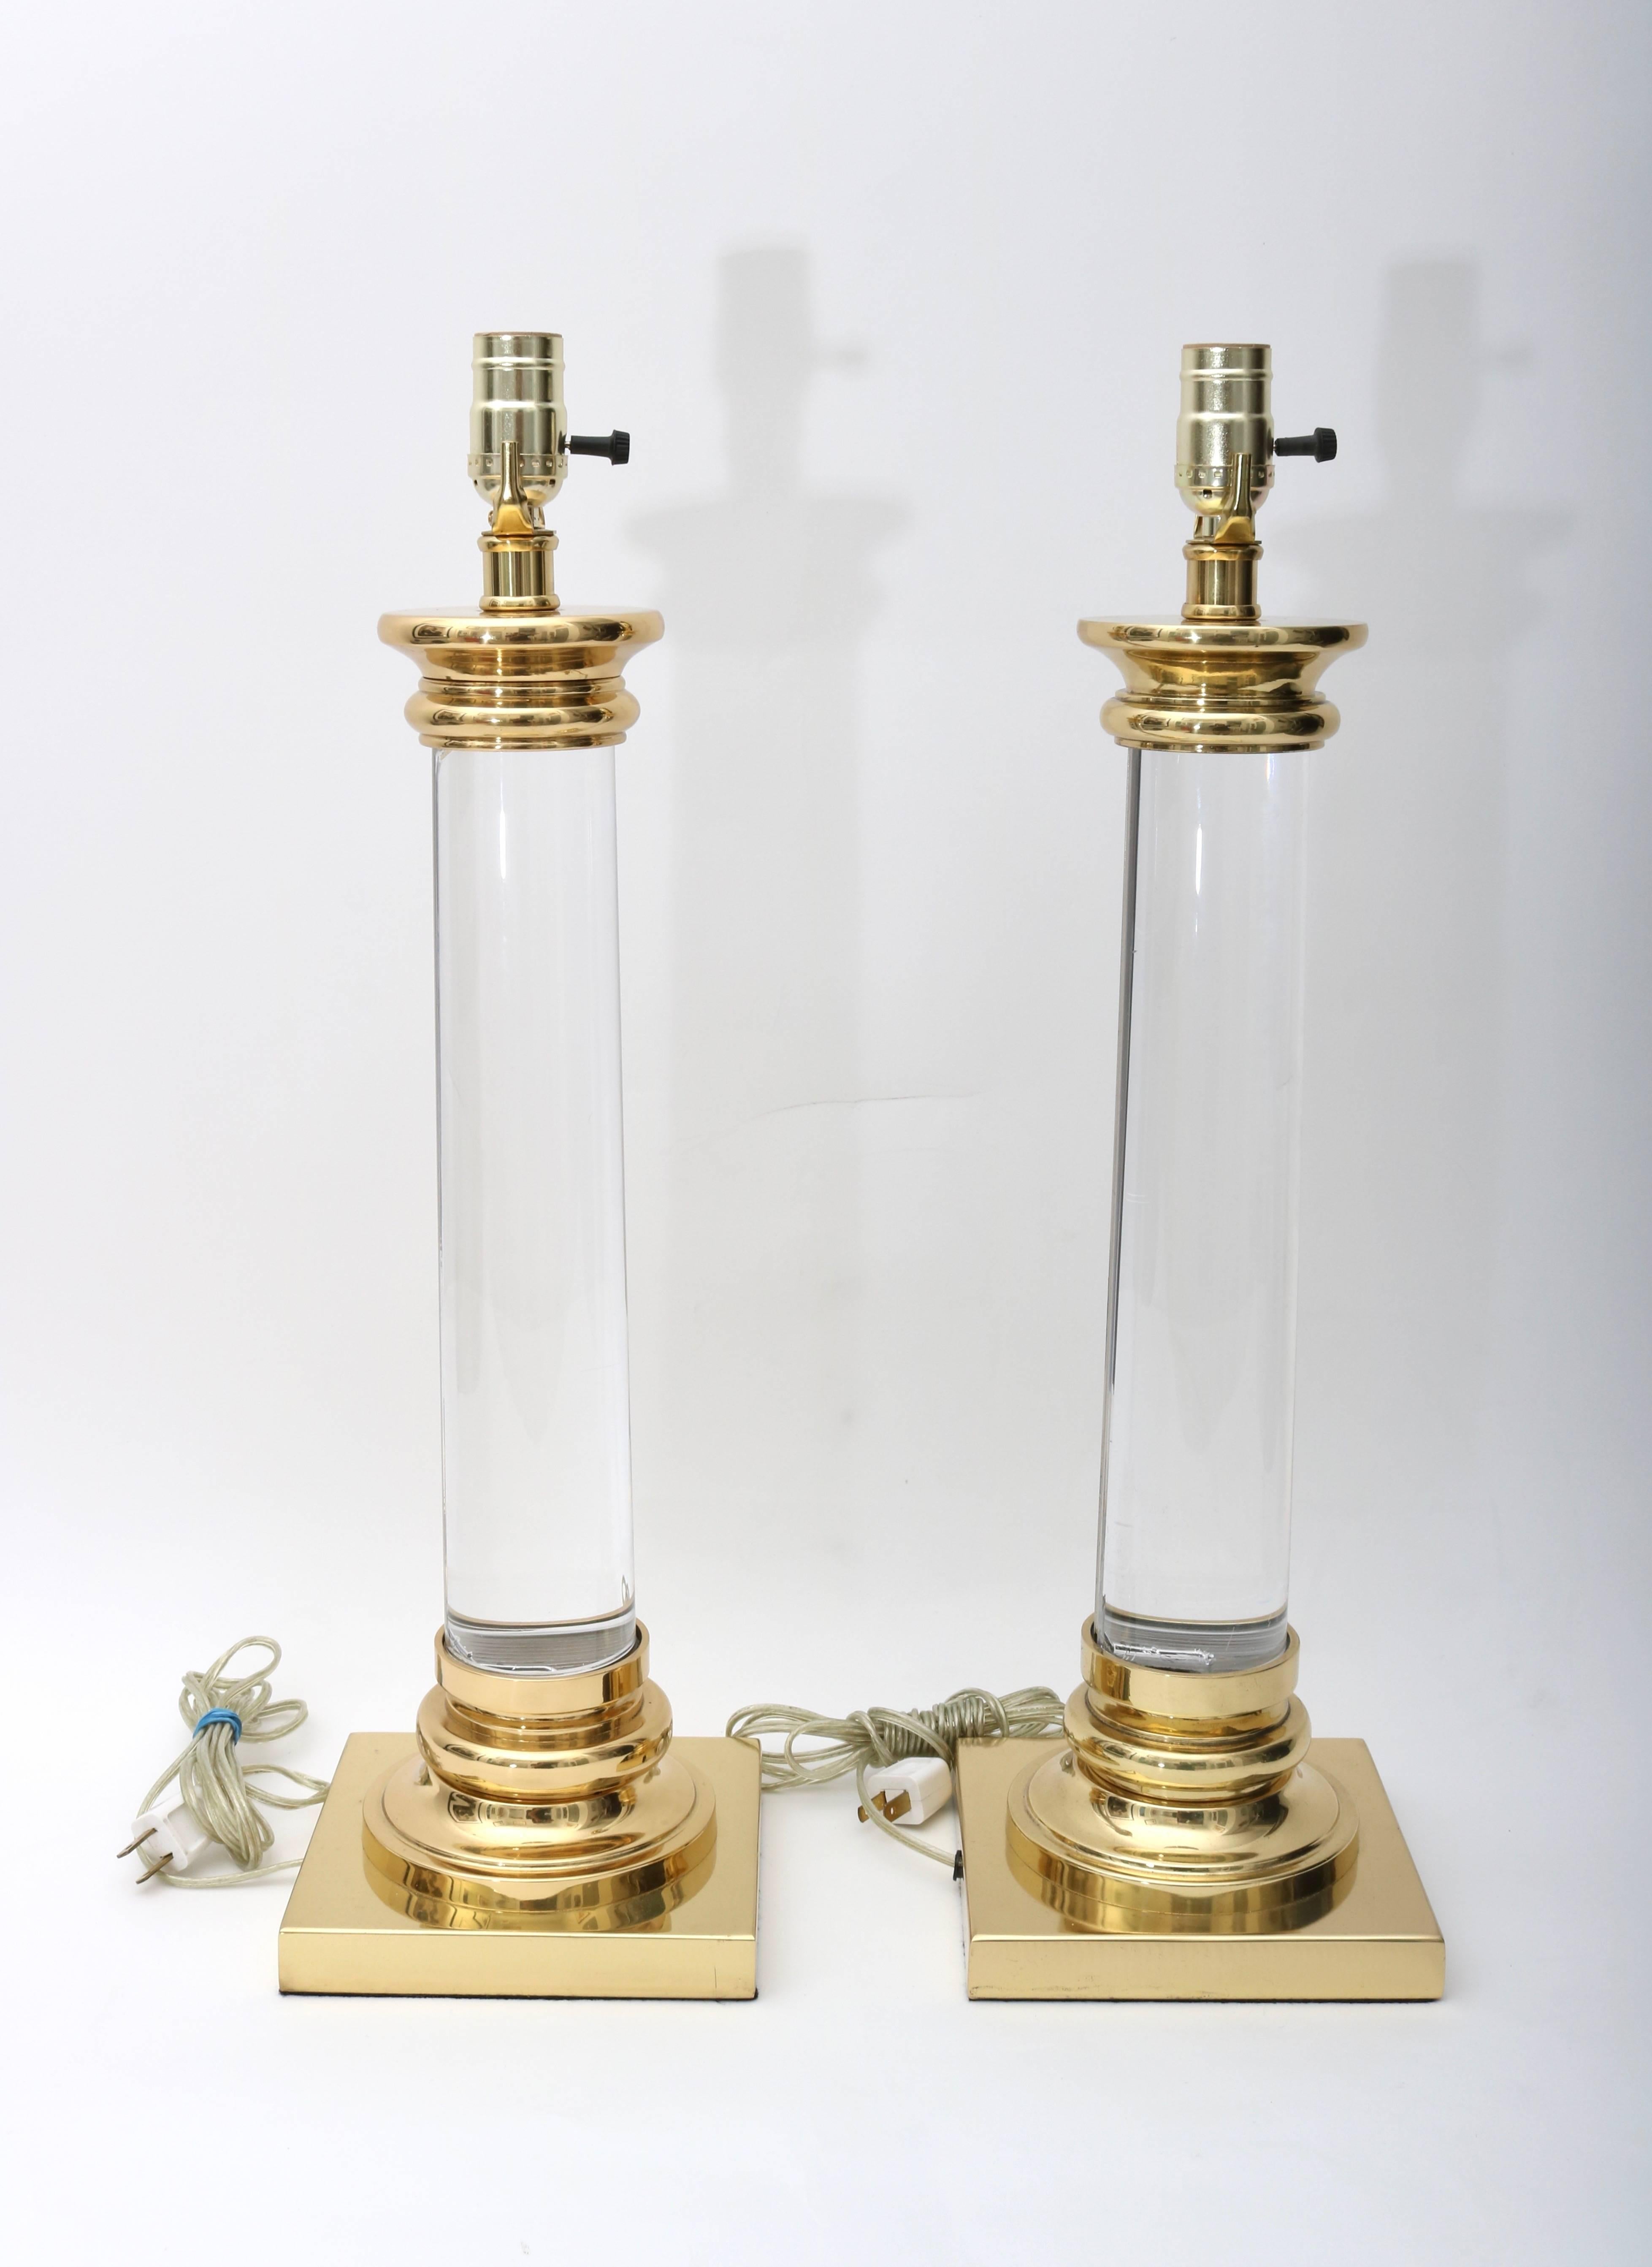 This pair of table lamps are very much in the style of pieces created by Karl Springer in the 1980s. The clear Lucite columns and polished brass give them a sense of lightness and yet a strong presence.

Note: They have been recently